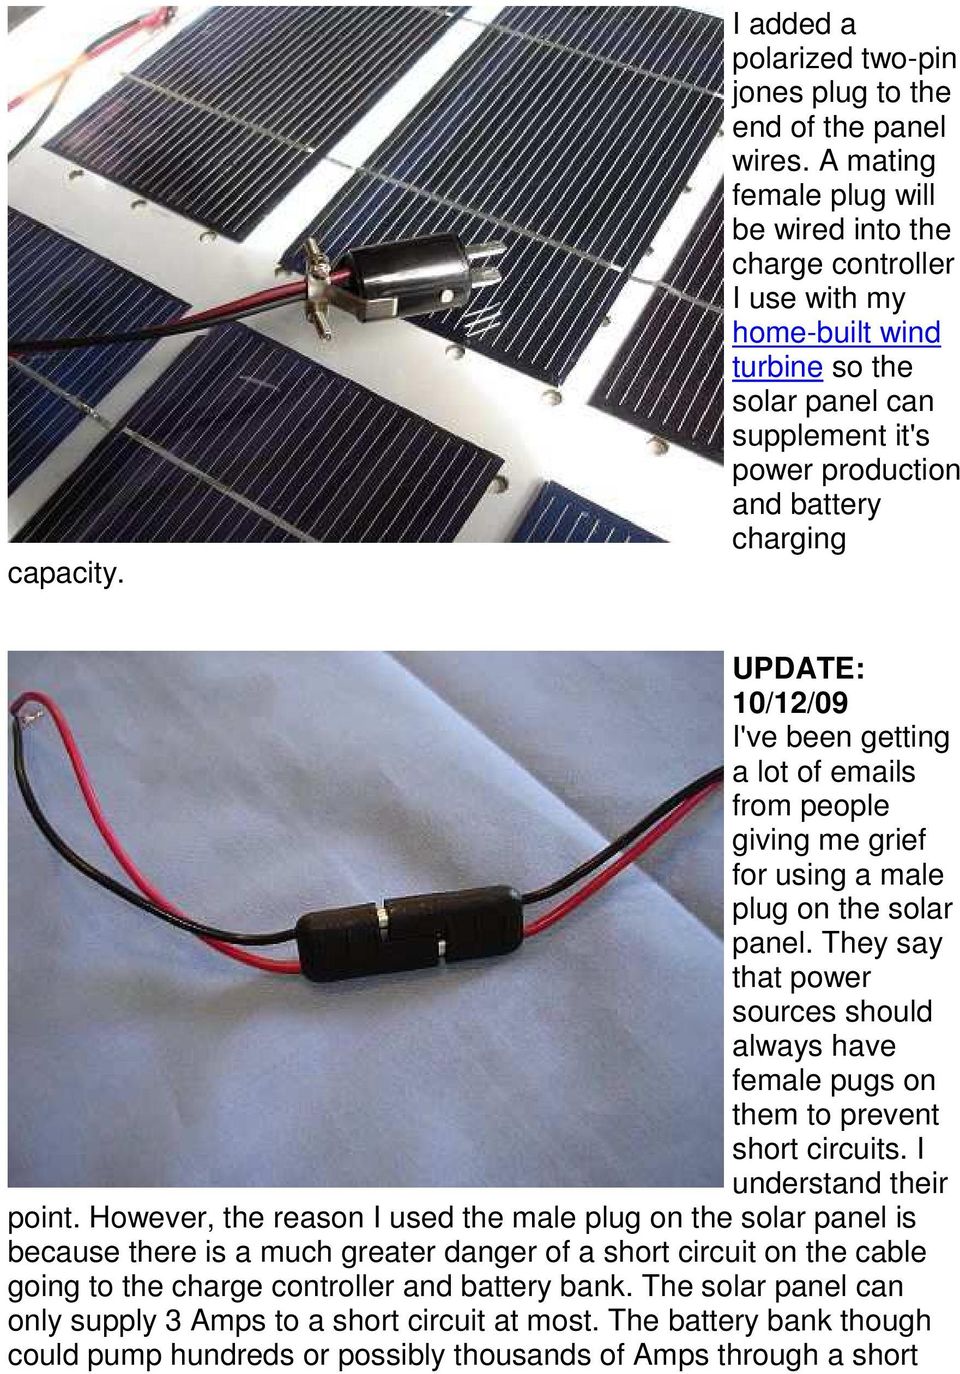 been getting a lot of emails from people giving me grief for using a male plug on the solar panel. They say that power sources should always have female pugs on them to prevent short circuits.